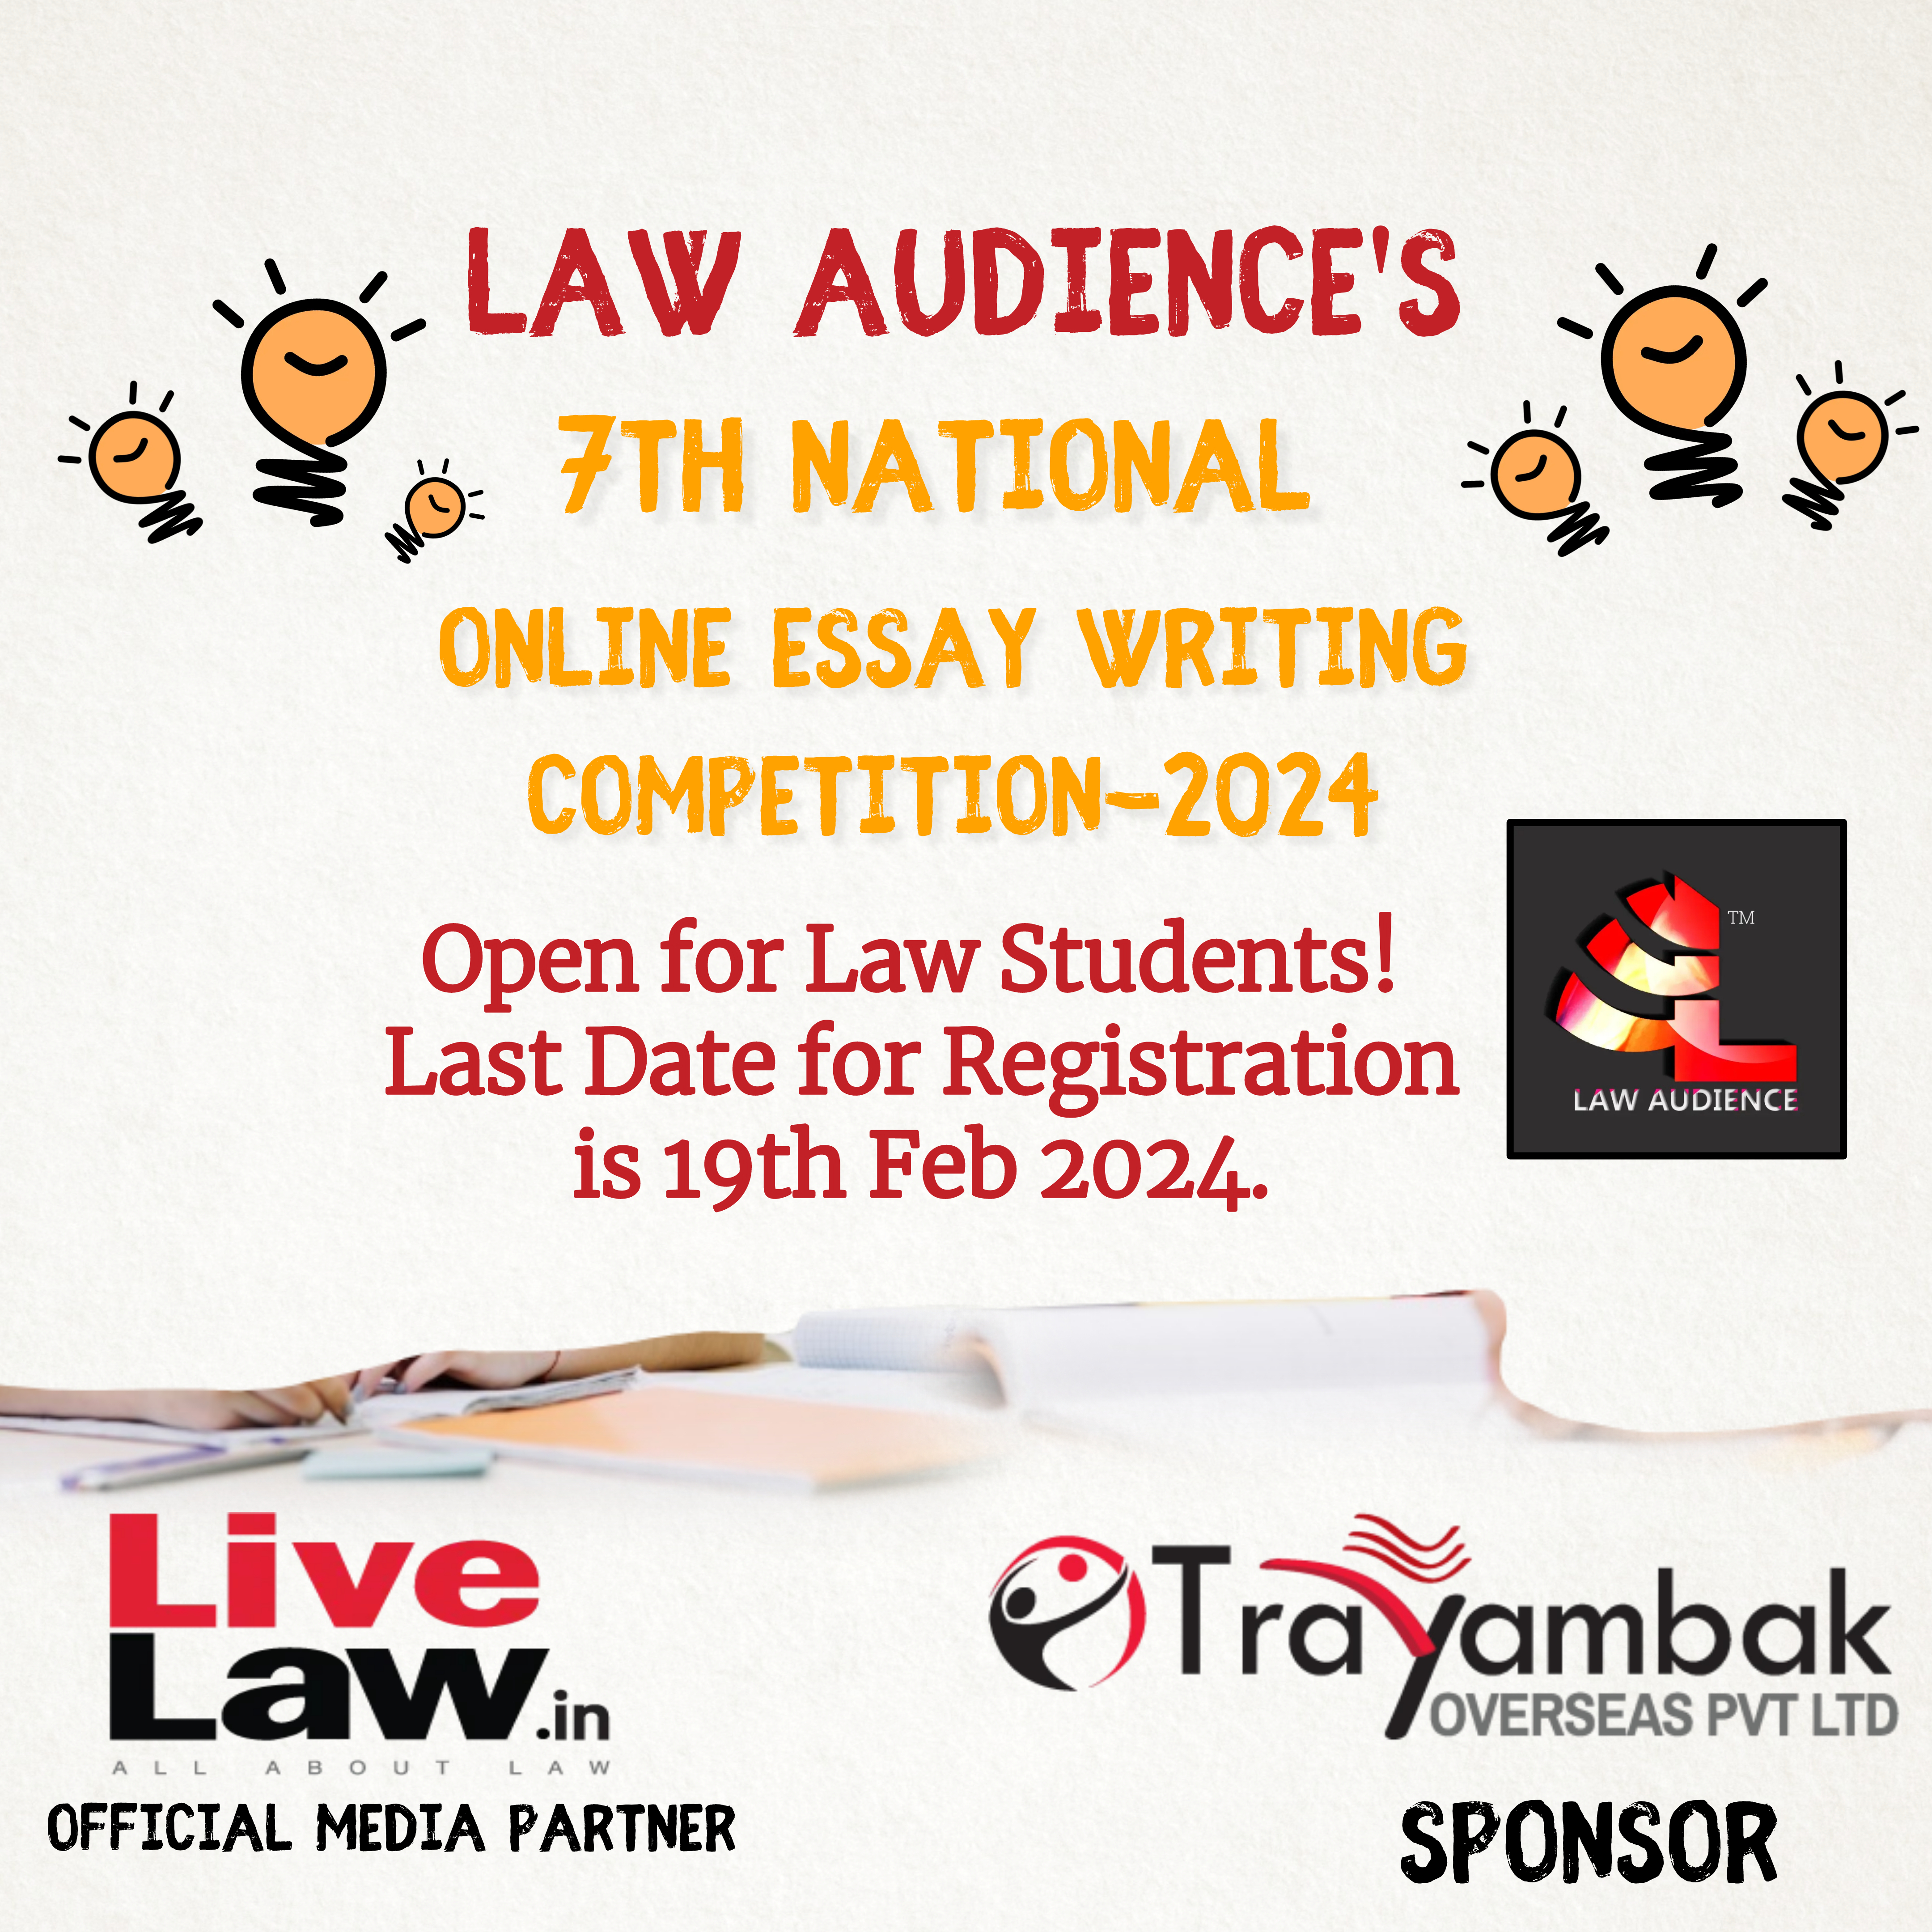 Results: Law Audience’s 7th National Online Essay Writing Competition-2024